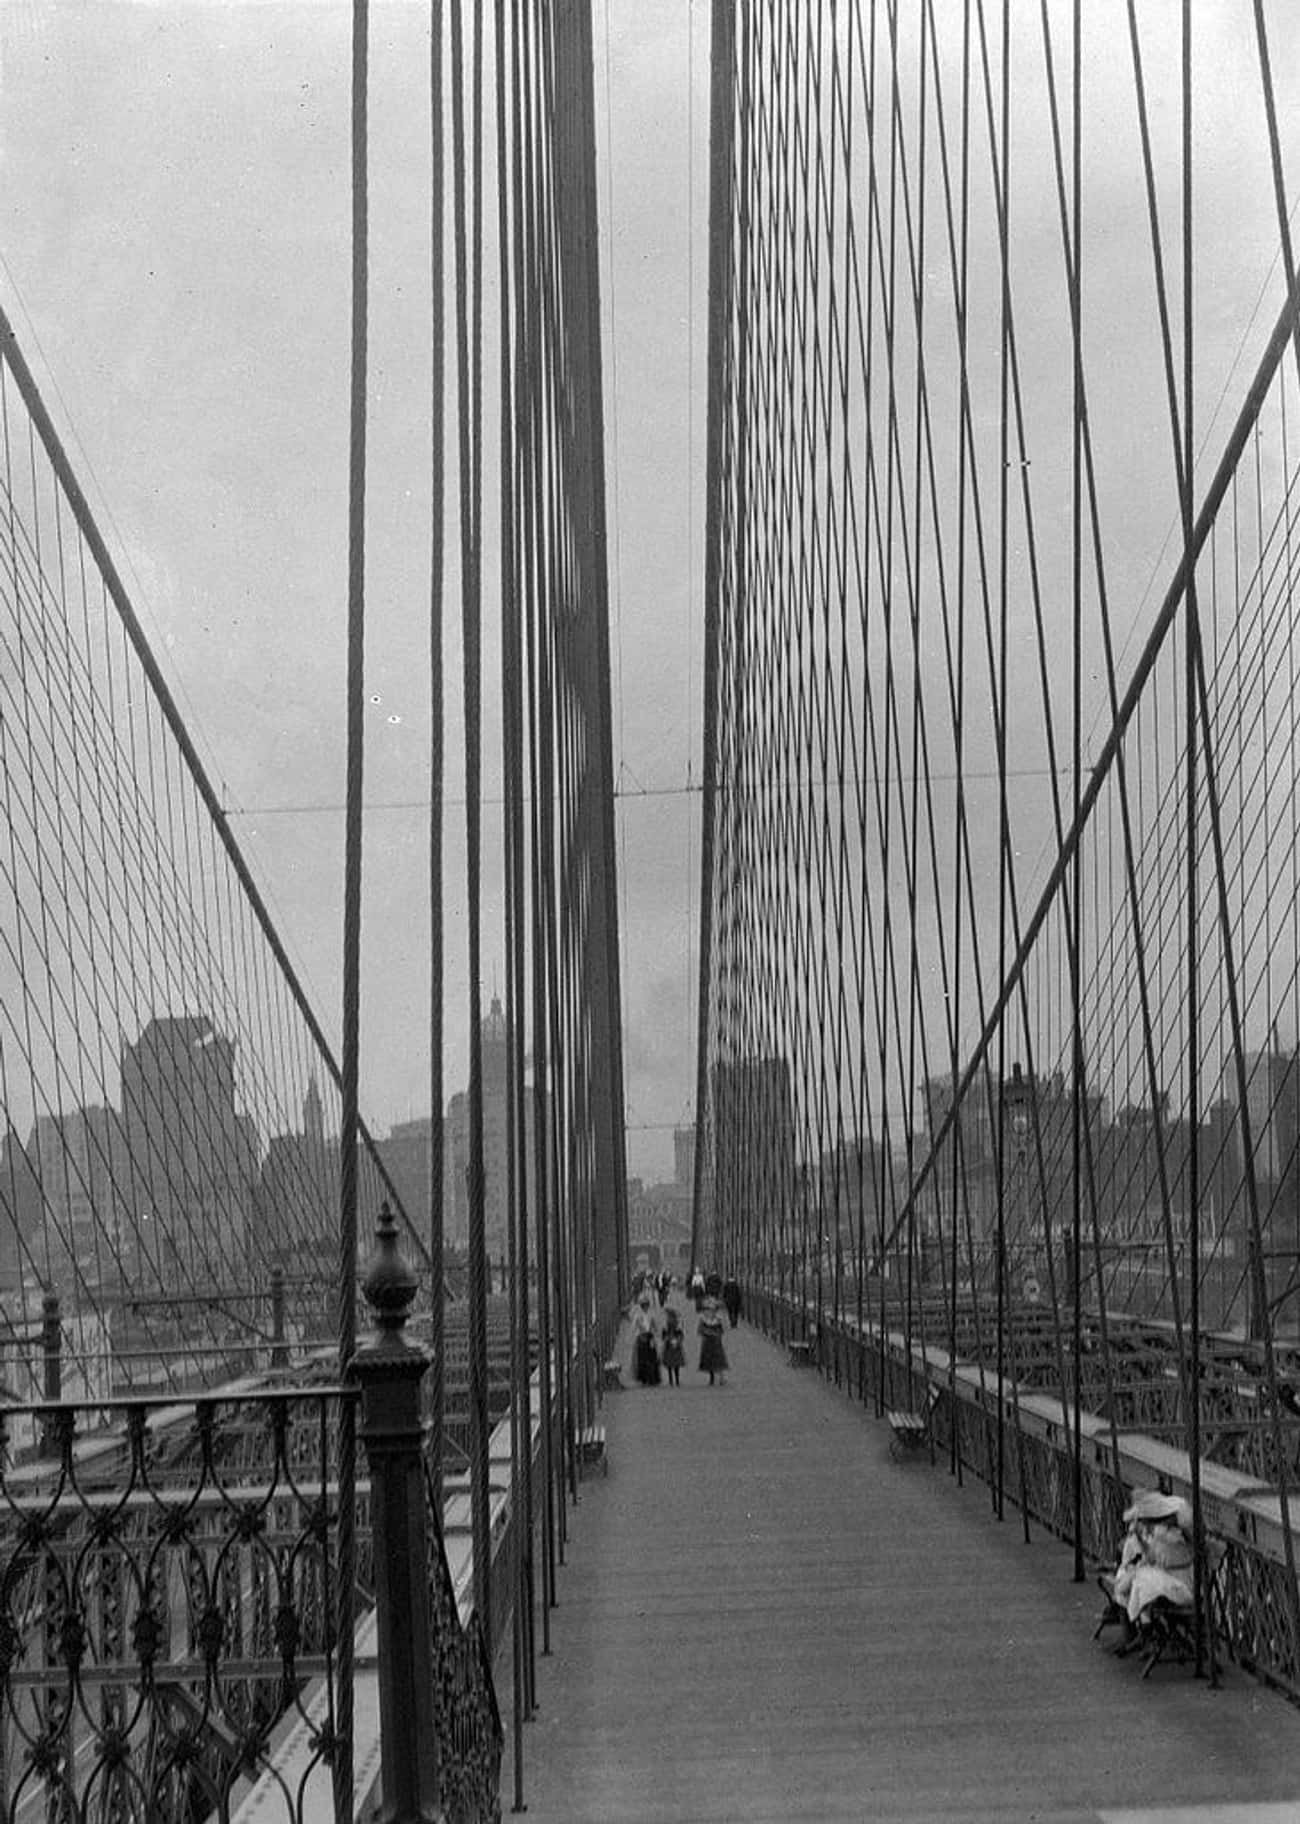 It Was The First Steel Suspension Bridge In The World